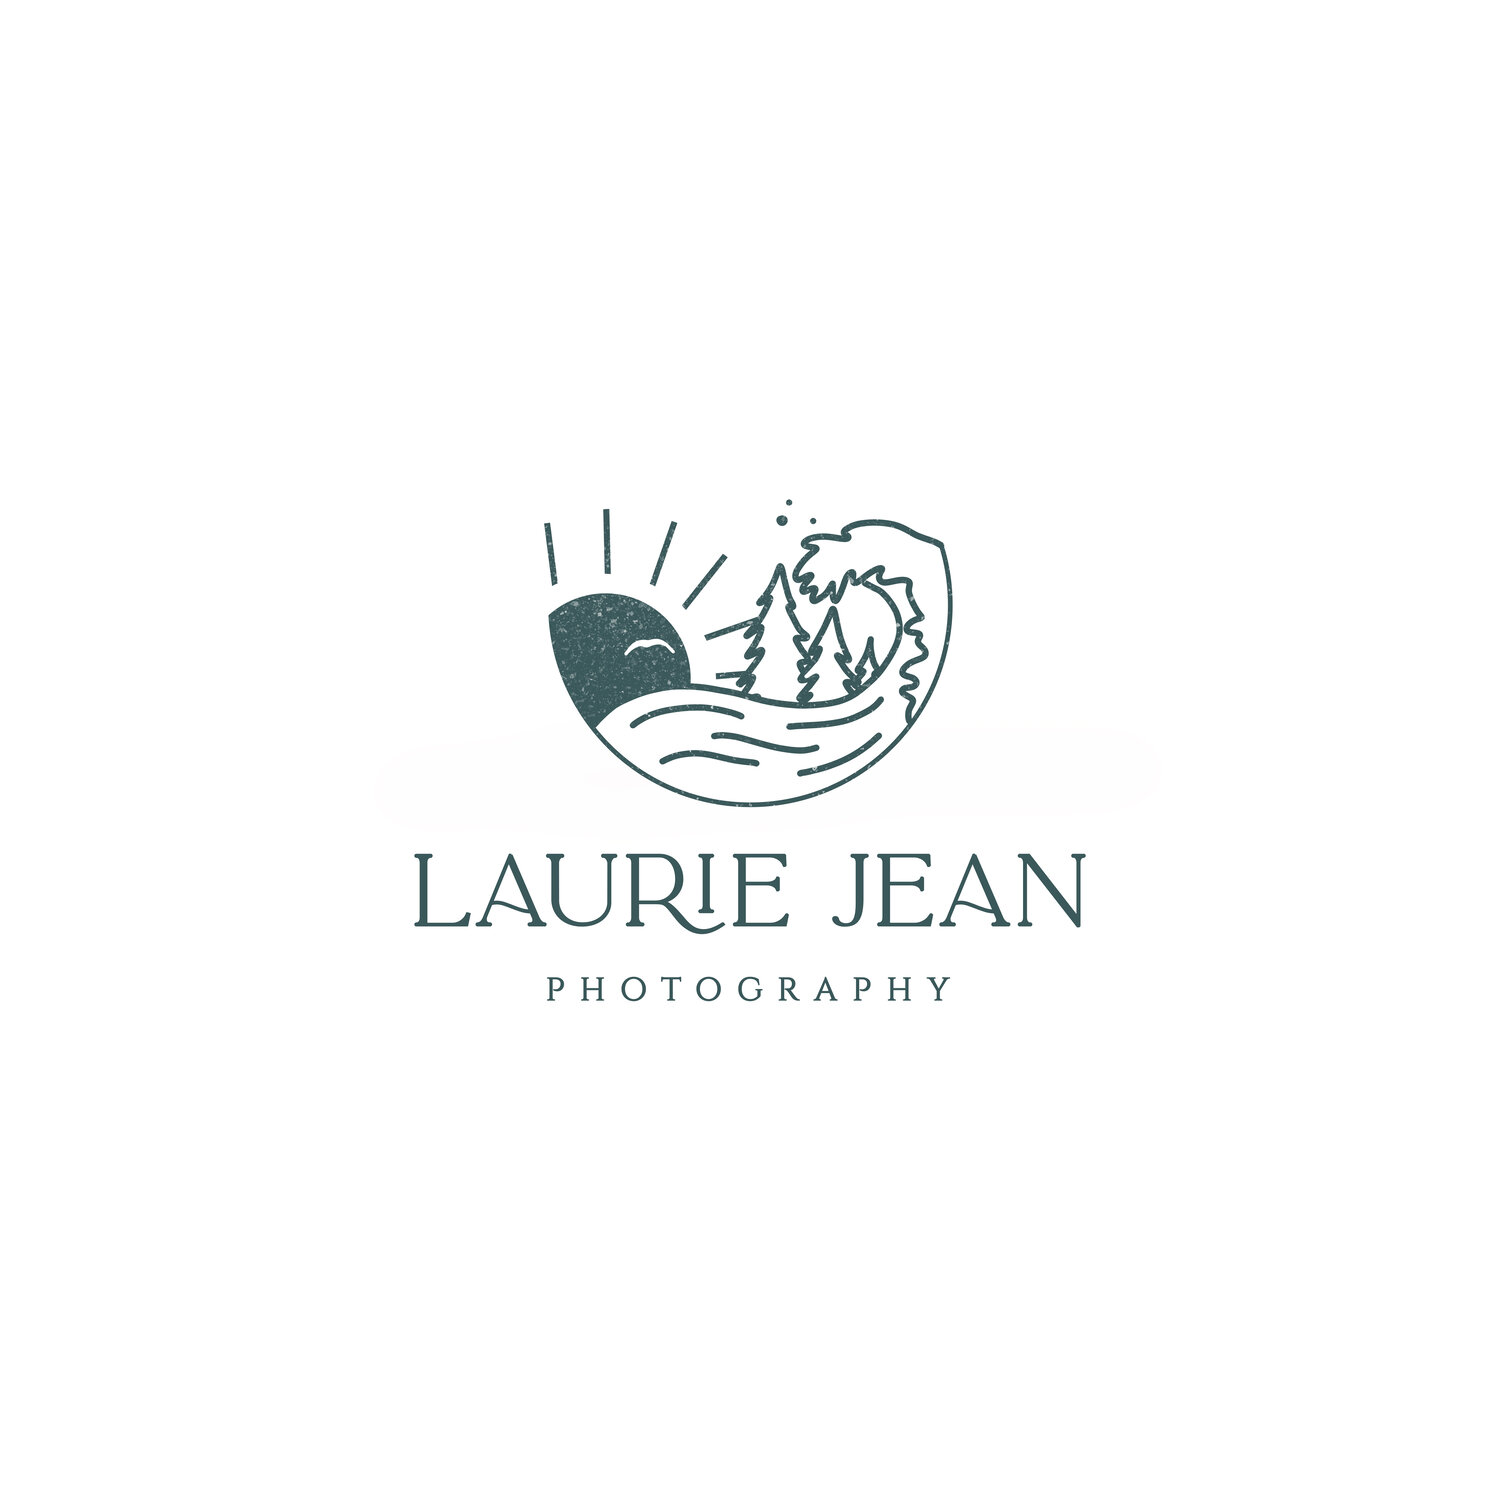 Laurie Jean Photography